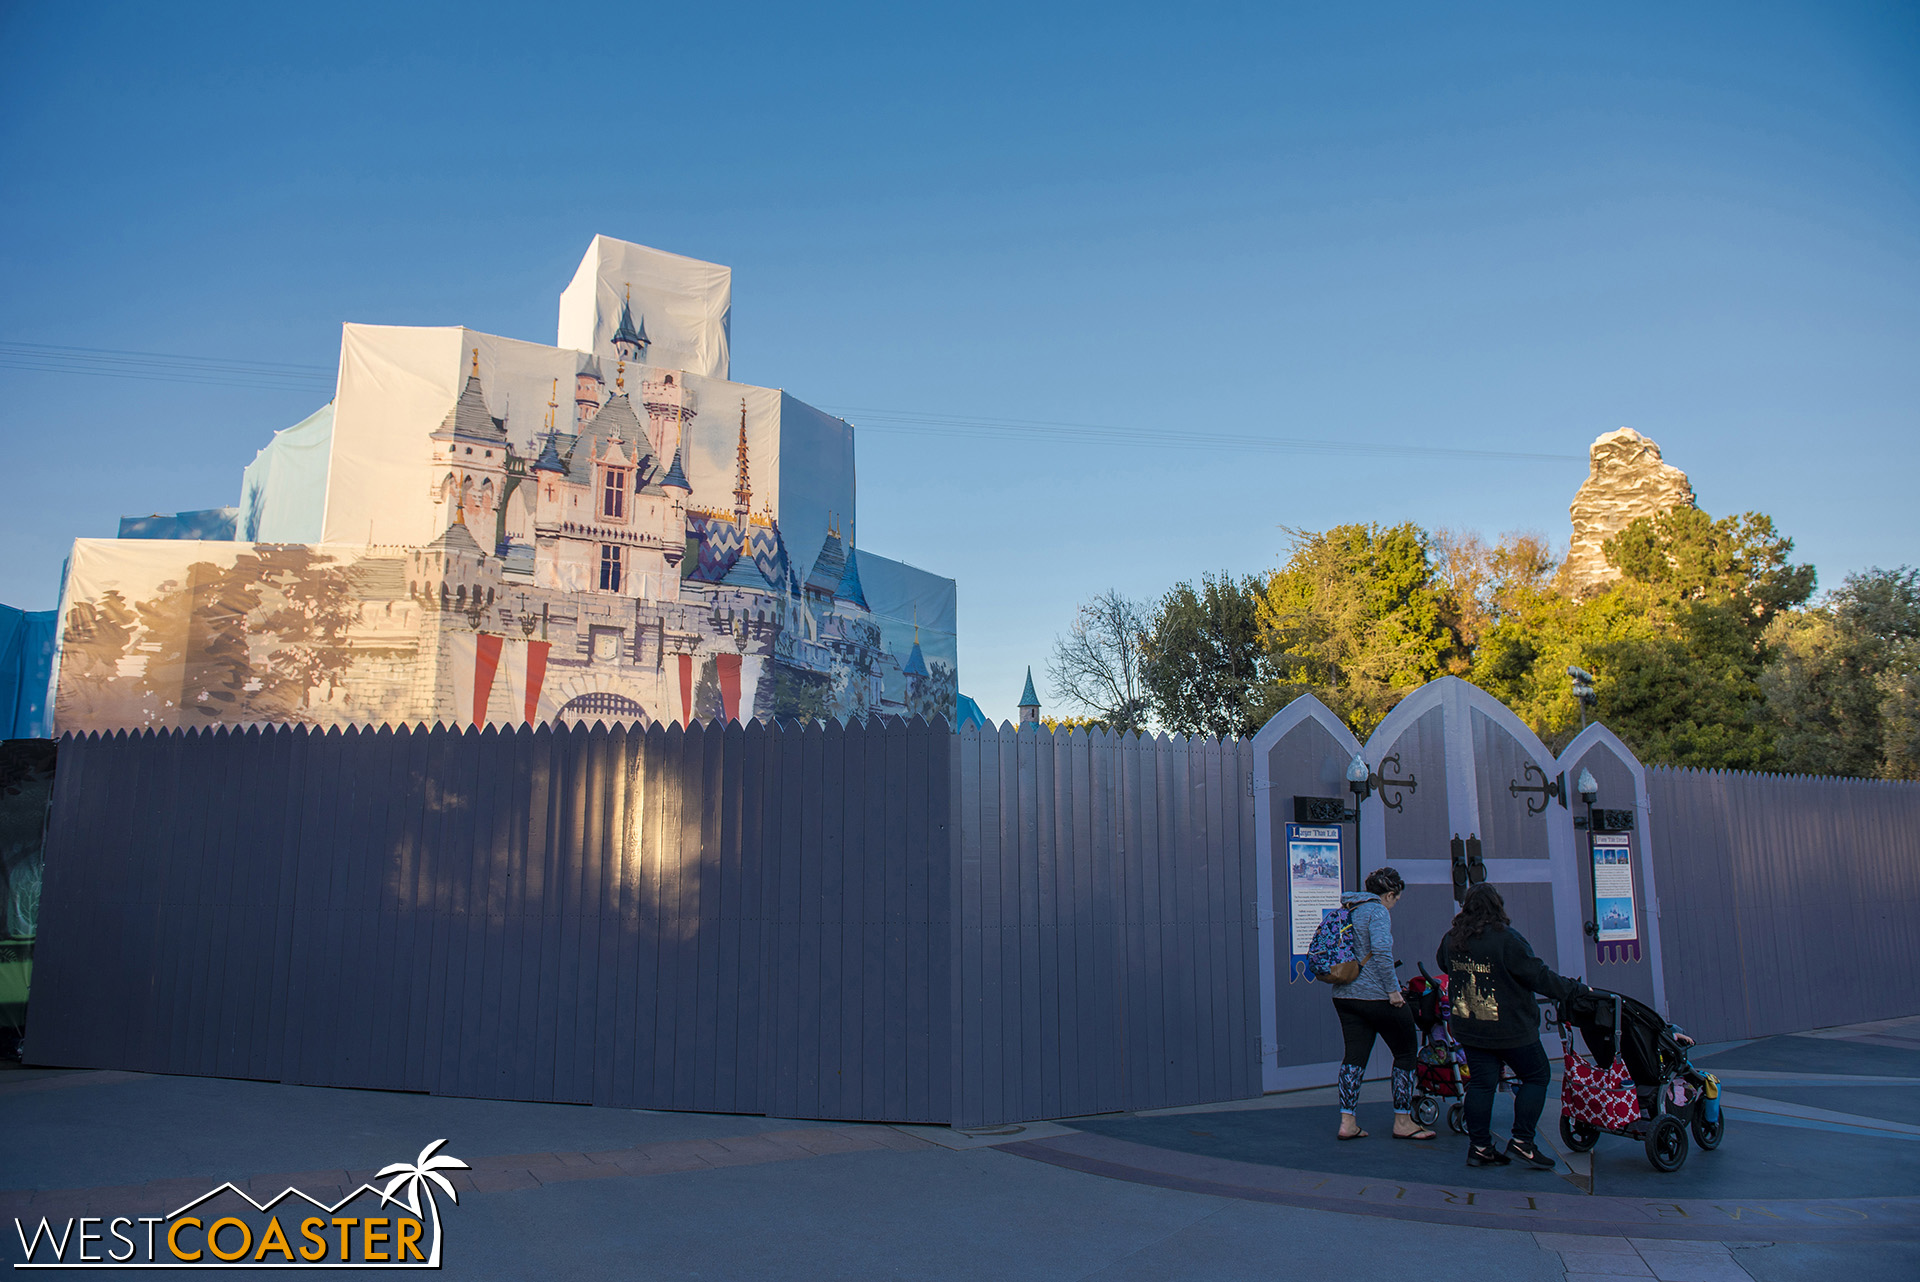  During the daytime, the pathway from Fantasy Faire to Fantasyland has been reserved for Bibbity Bobbity Boutique, so guests need to take the parade route between the Castle and the Matterhorn or the old Big Thunder Ranch passage. 